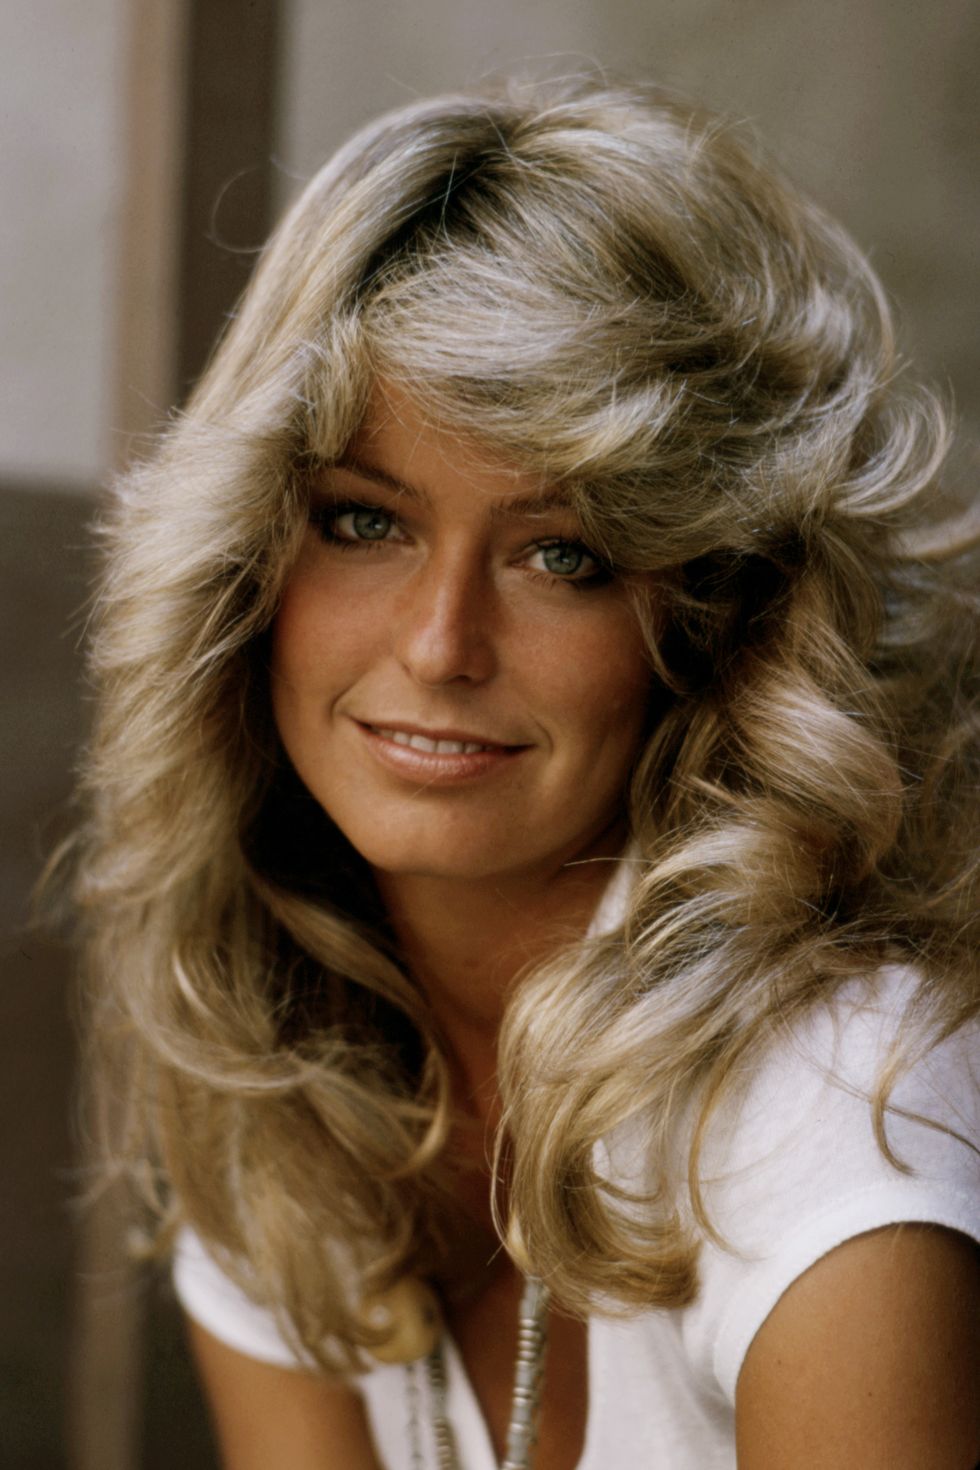 https://hips.hearstapps.com/hmg-prod/images/farrah-fawcett-appearing-in-the-abc-tv-series-harry-o-news-photo-1644503735.jpg?crop=0.99406xw:1xh;center,top&resize=980:*